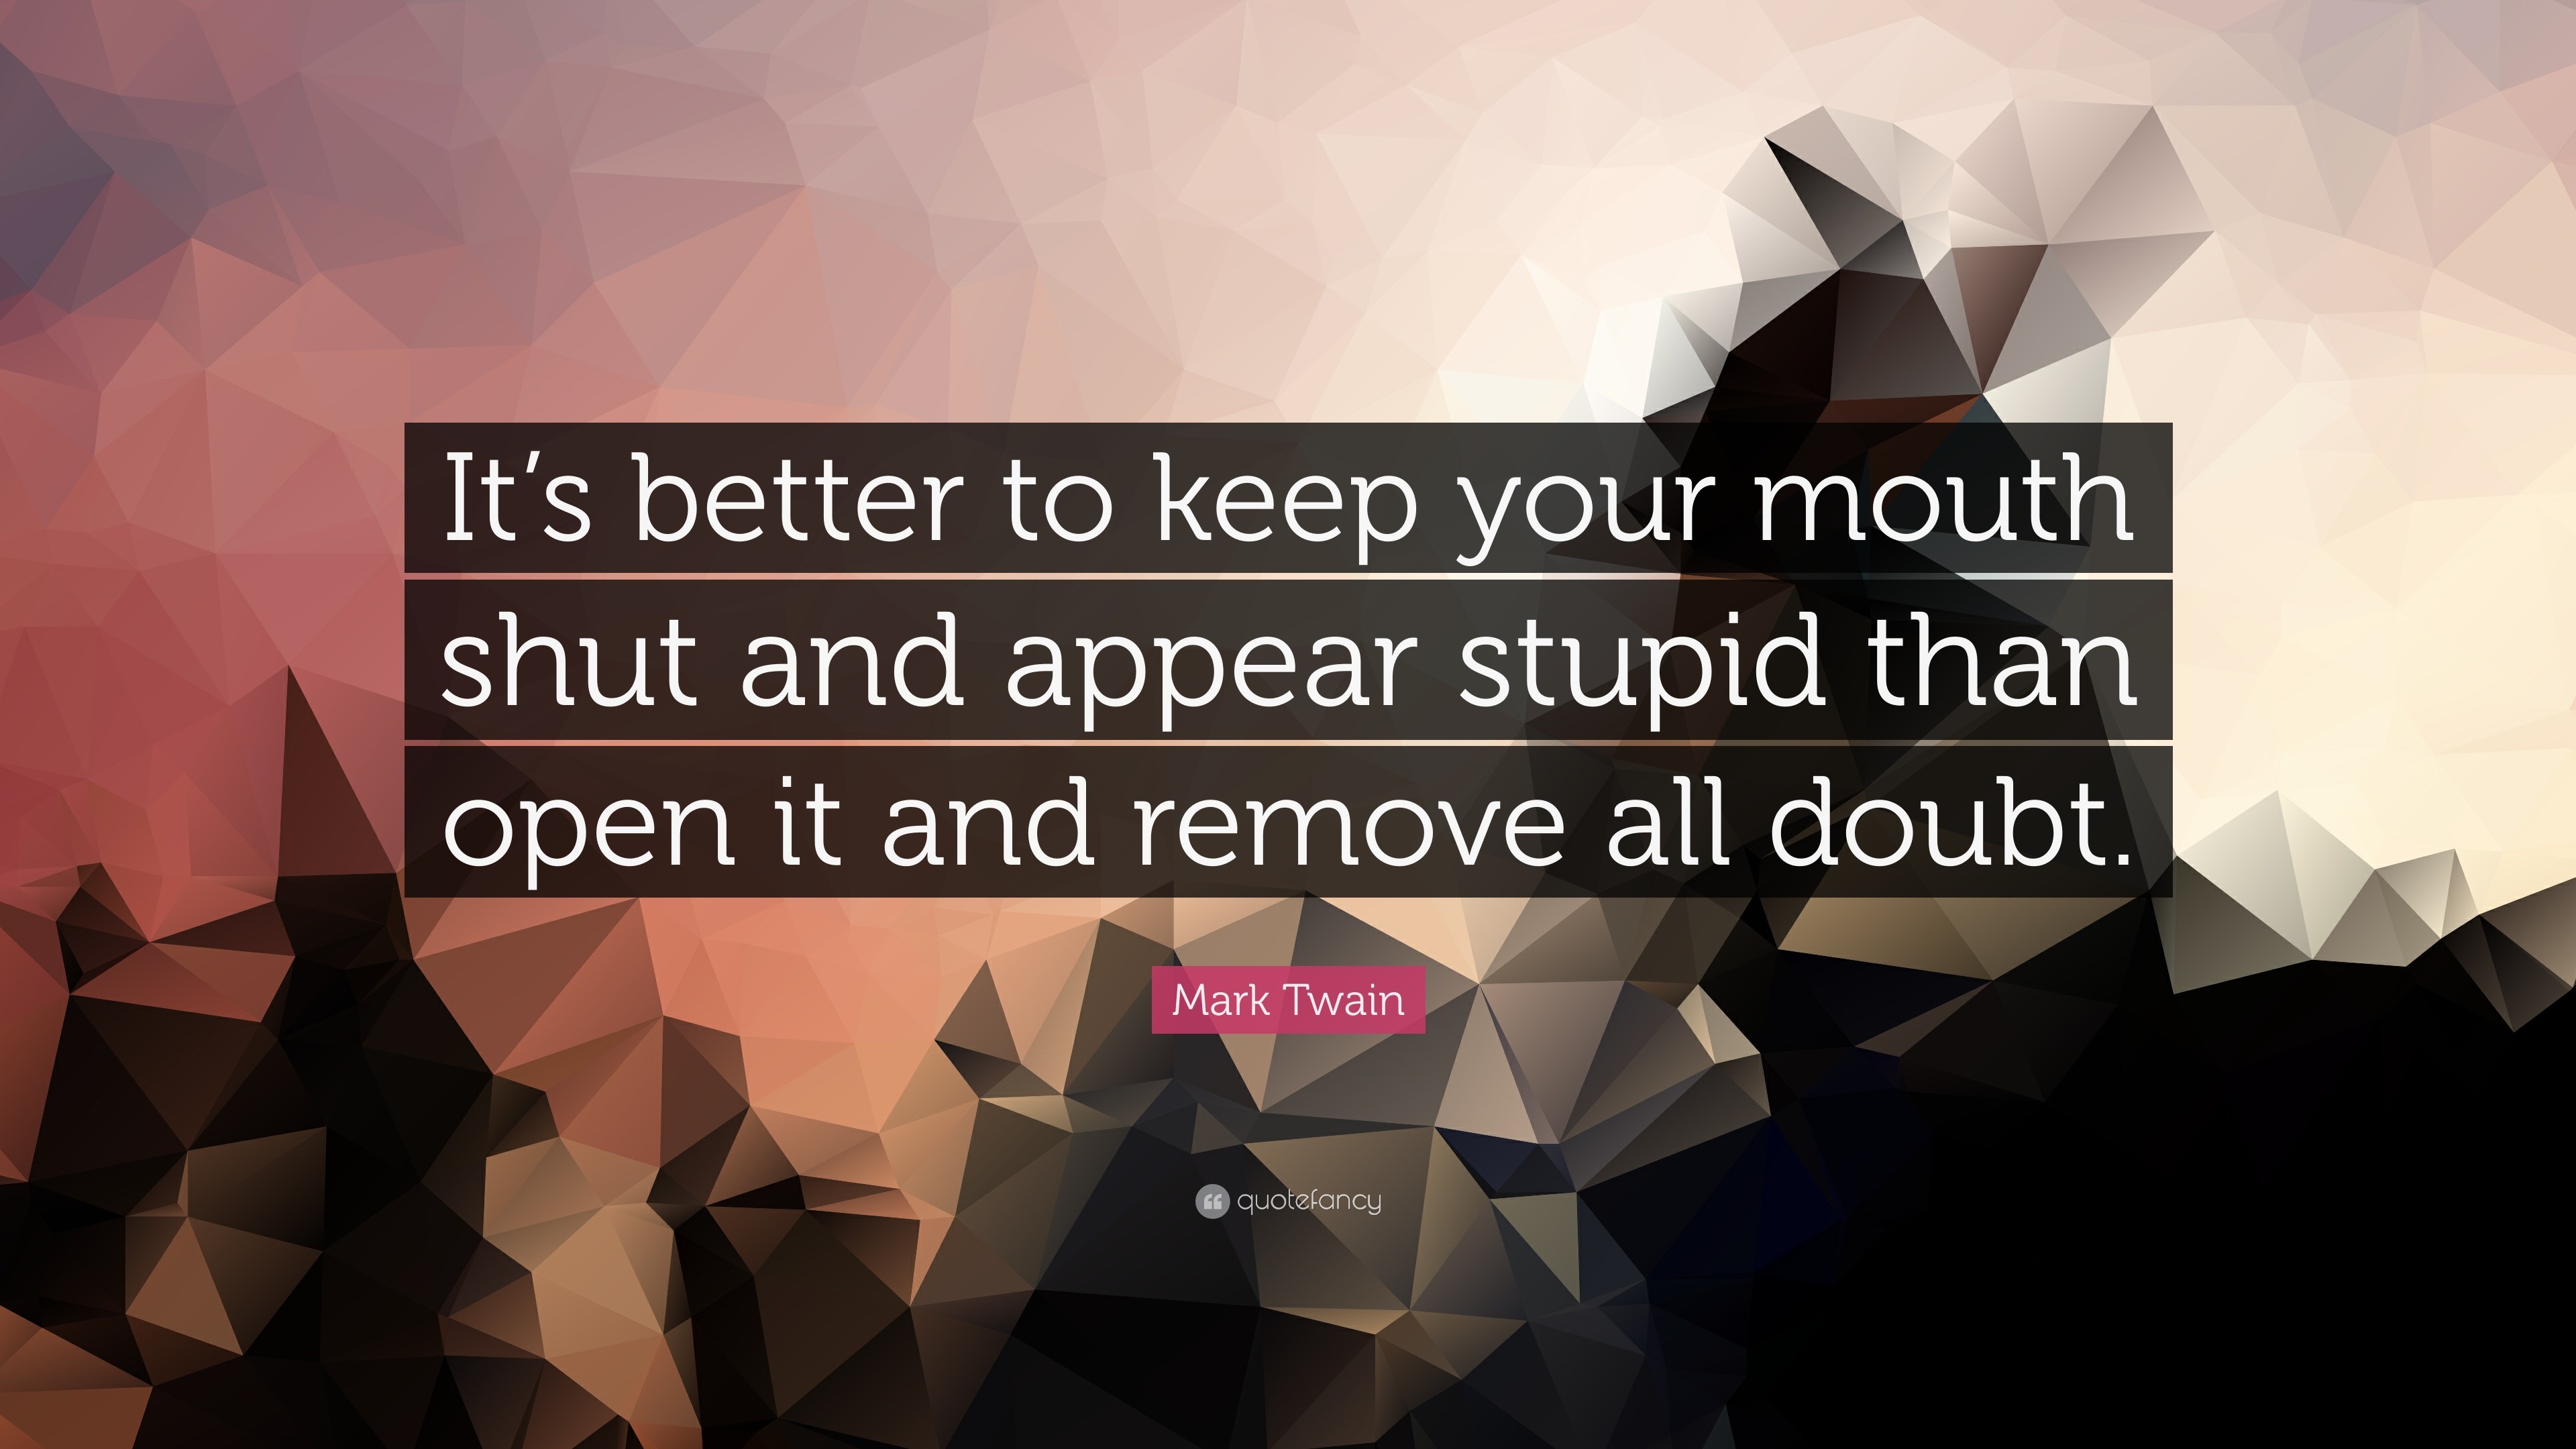 When to Keep Your Mouth Shut by Benjamin Kennet